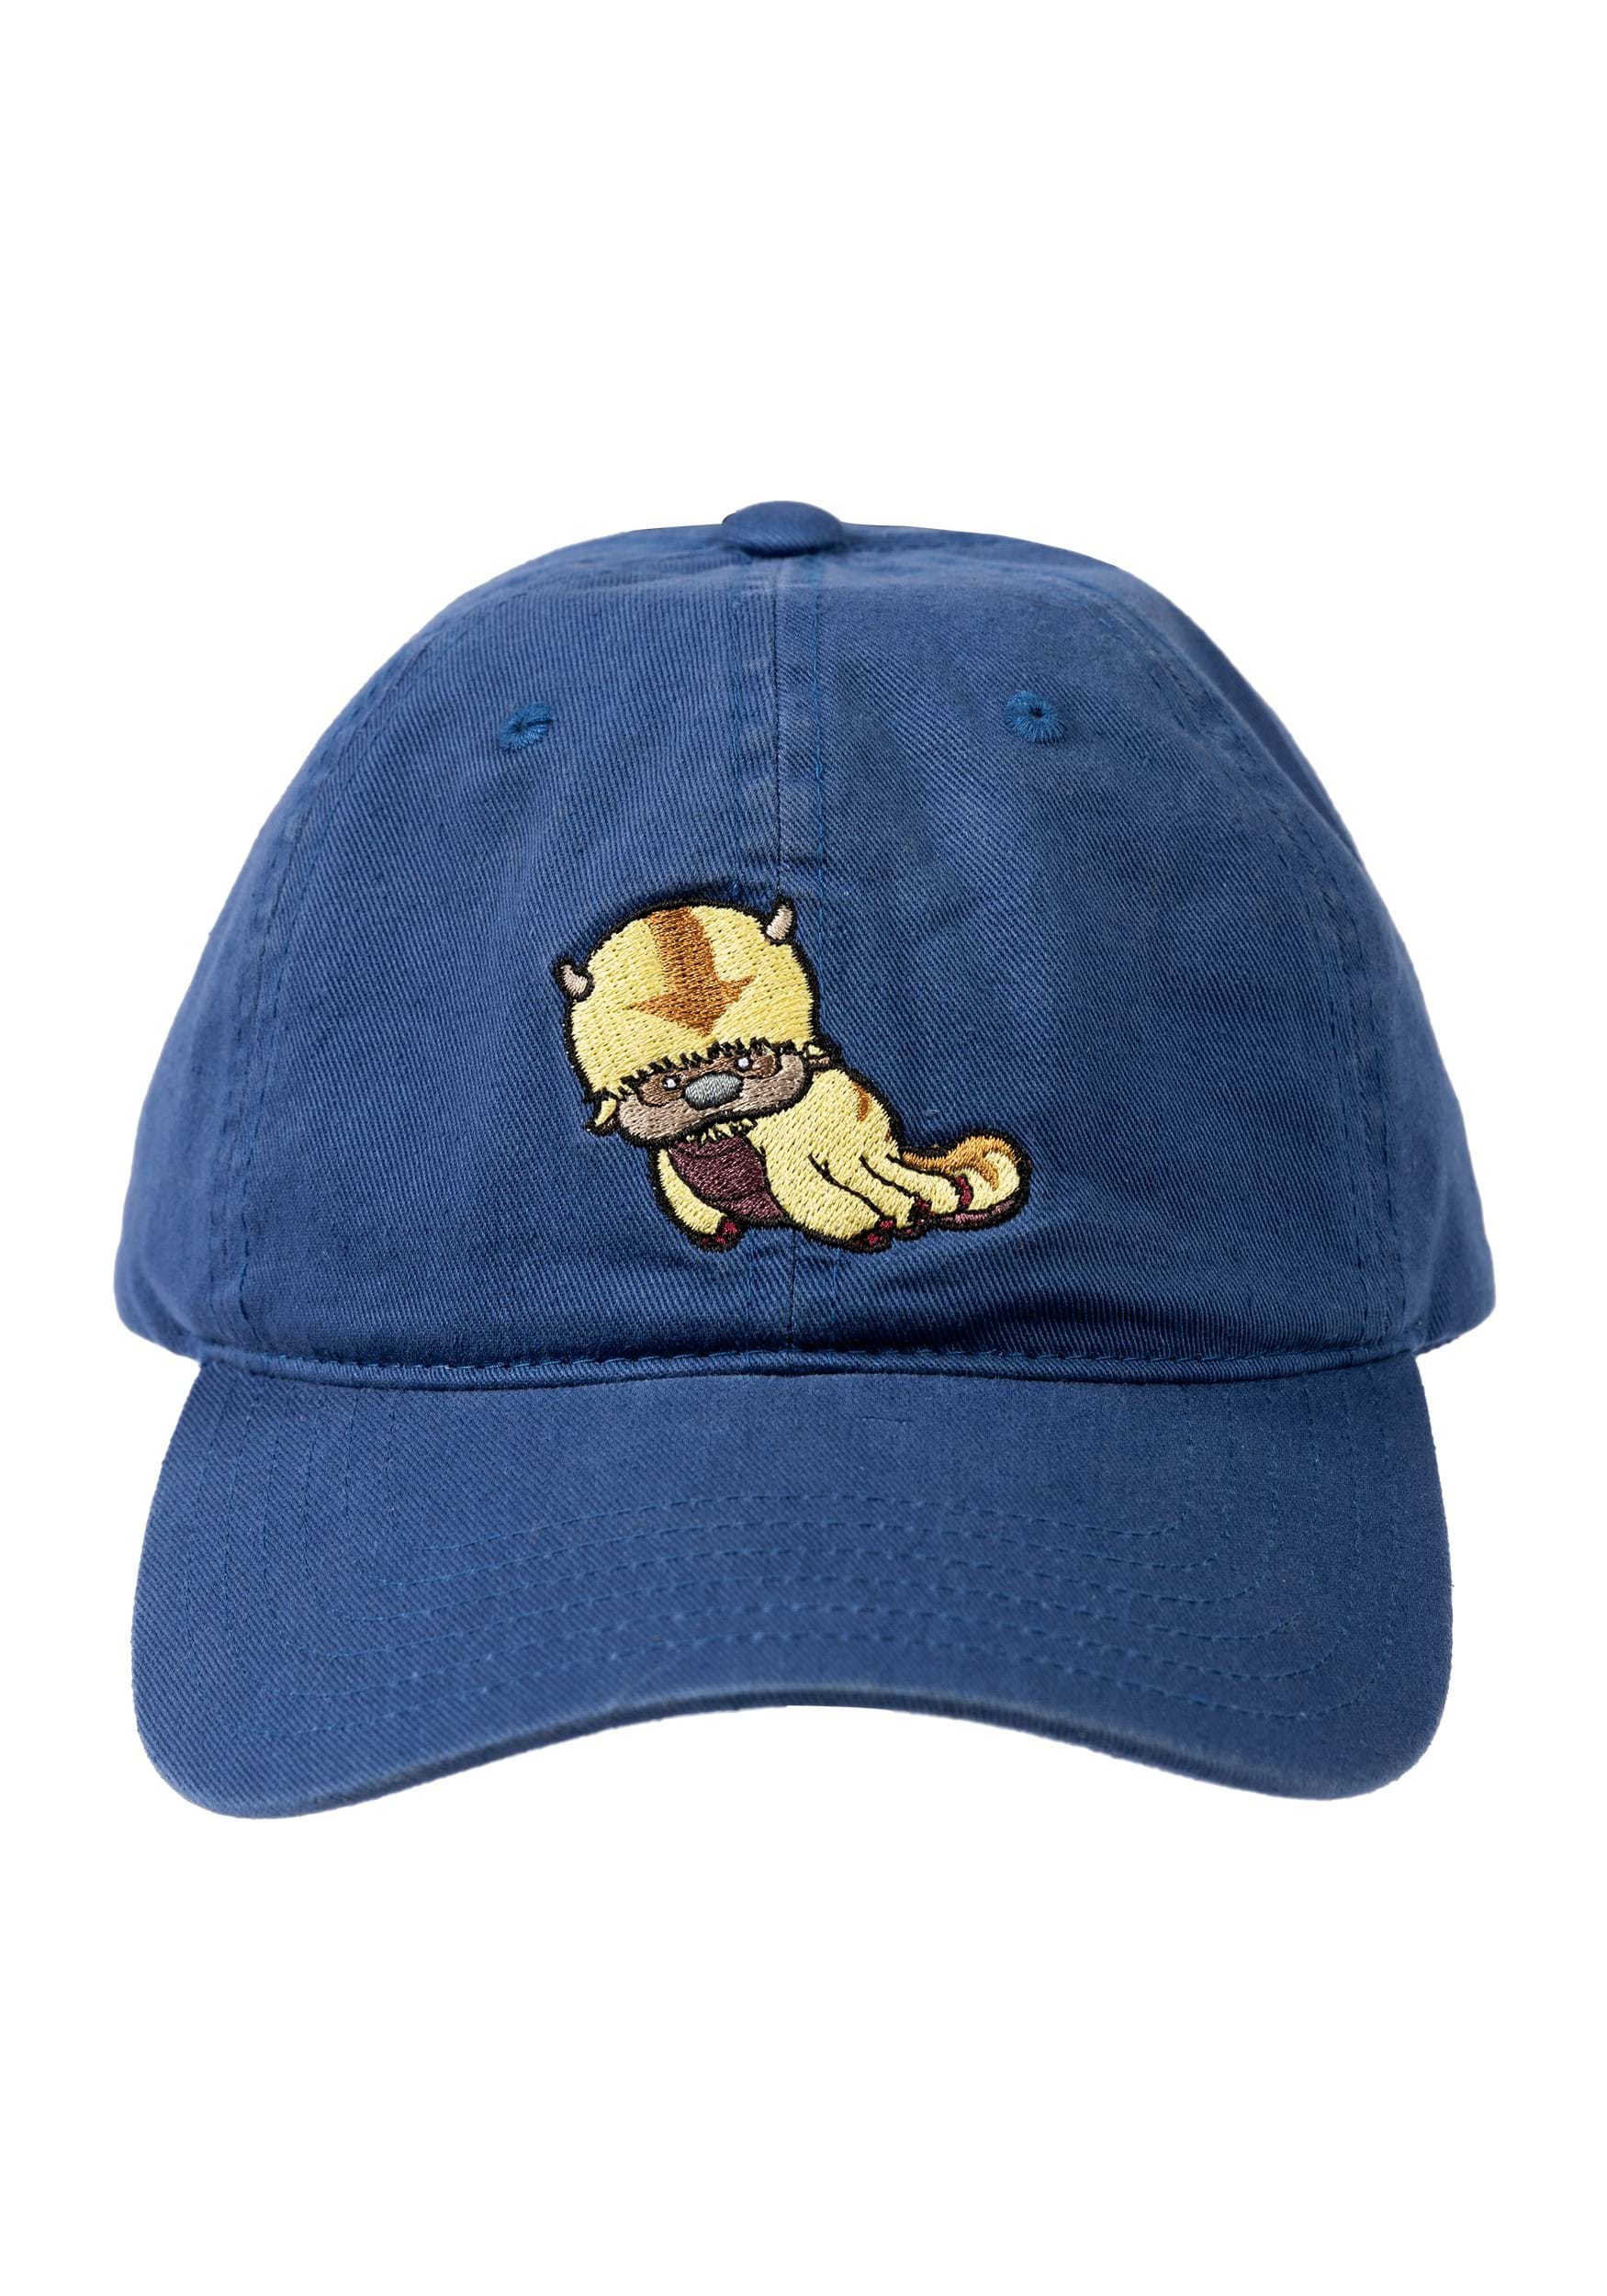 Avatar Appa Dad Cap Accessory , The Last Airbender Gifts